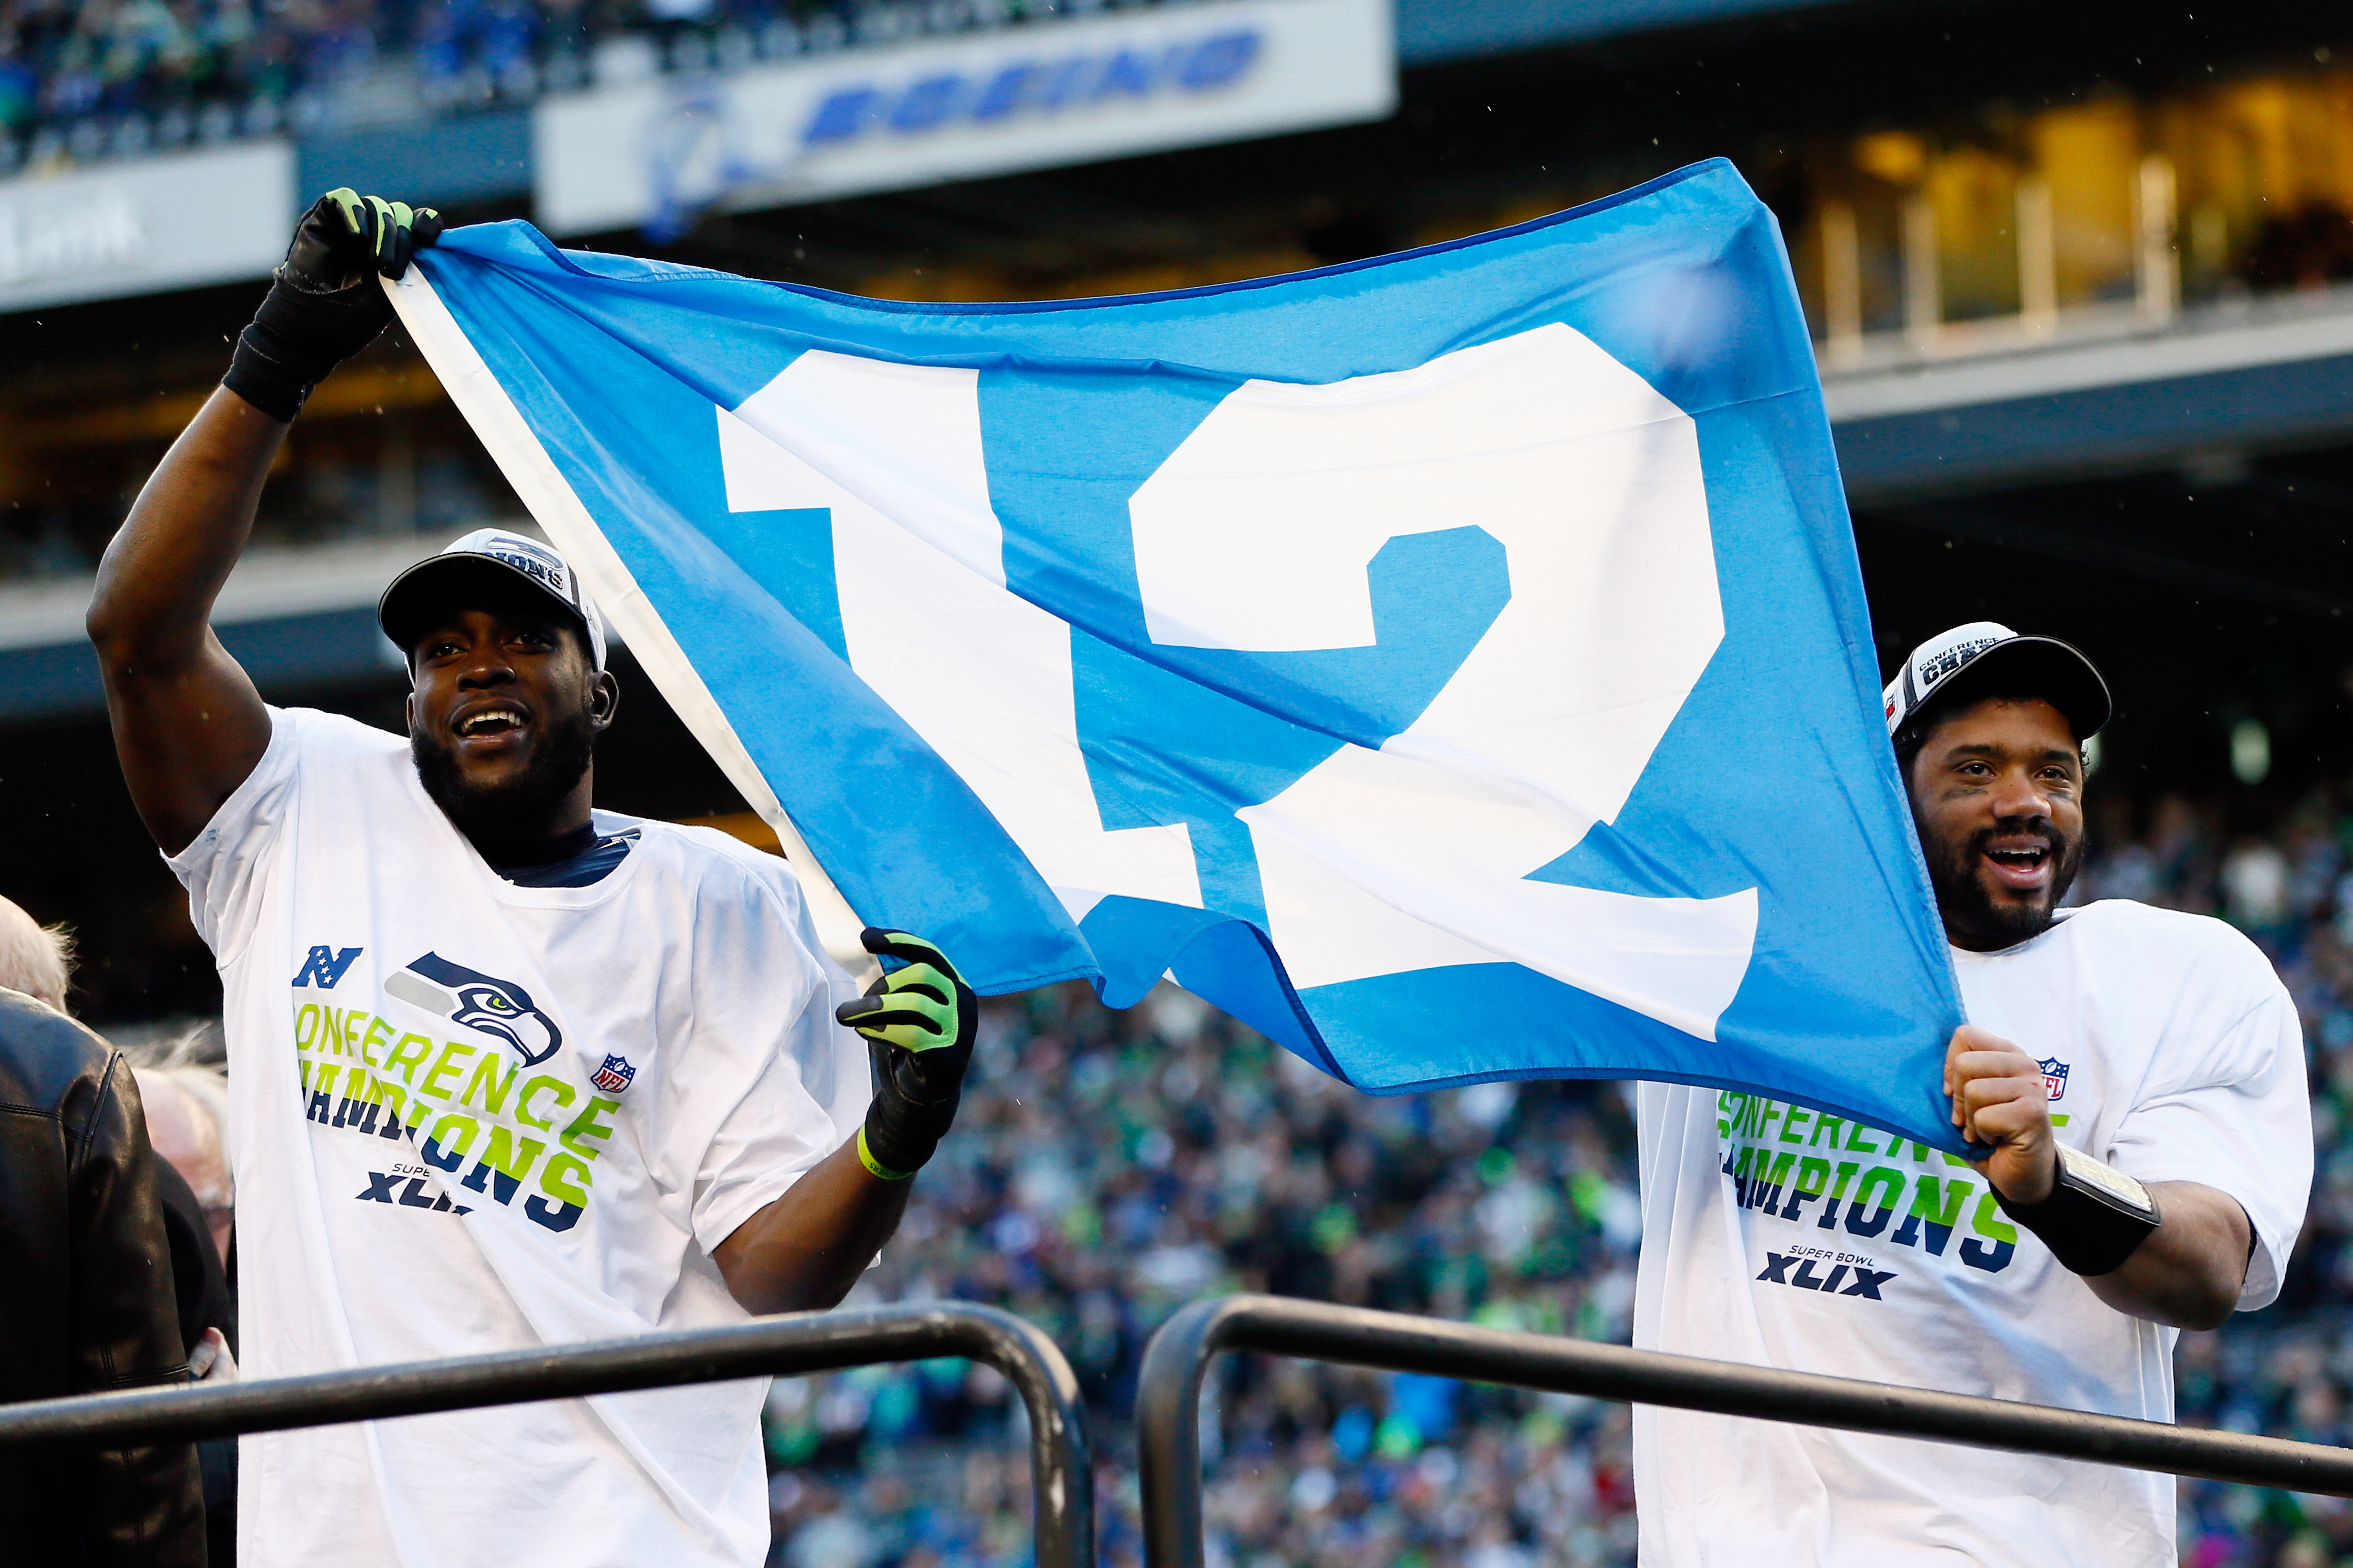 Kam Chancellor (L) and Russell Wilson #3 of the Seattle Seahawks celebrate with a 12th Man flag after defeating the Green Bay Packers in the 2015 NFC Championship game at CenturyLink Field on Jan. 18, 2015 in Seattle, Wash.